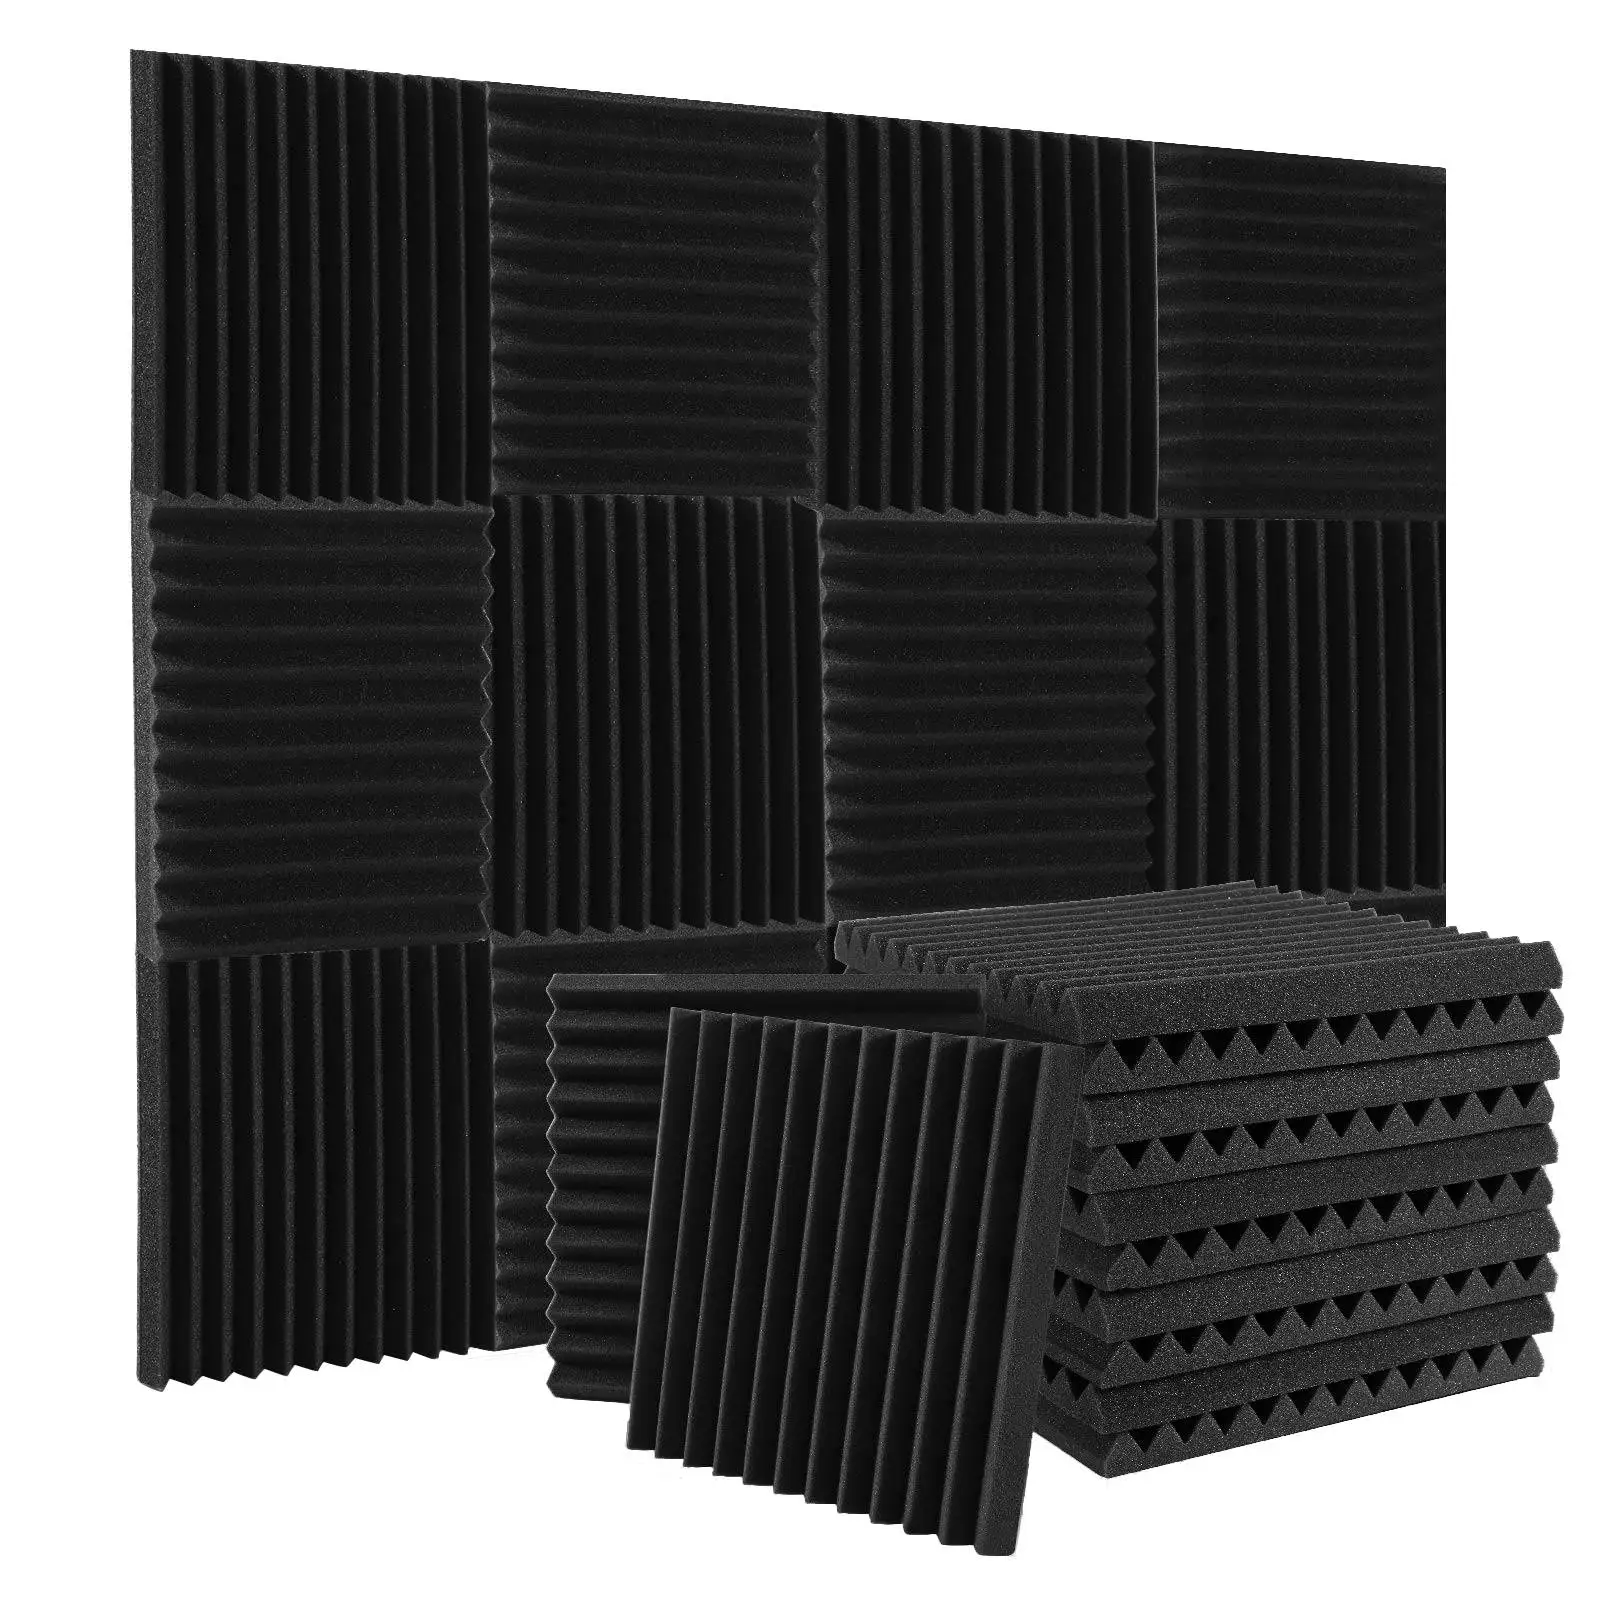 

Acoustic Foam Panels Wedges 48 Pack Acoustic Panels(1x 12x 12)Inch Fireproof Design for Studios Homes Office Studios